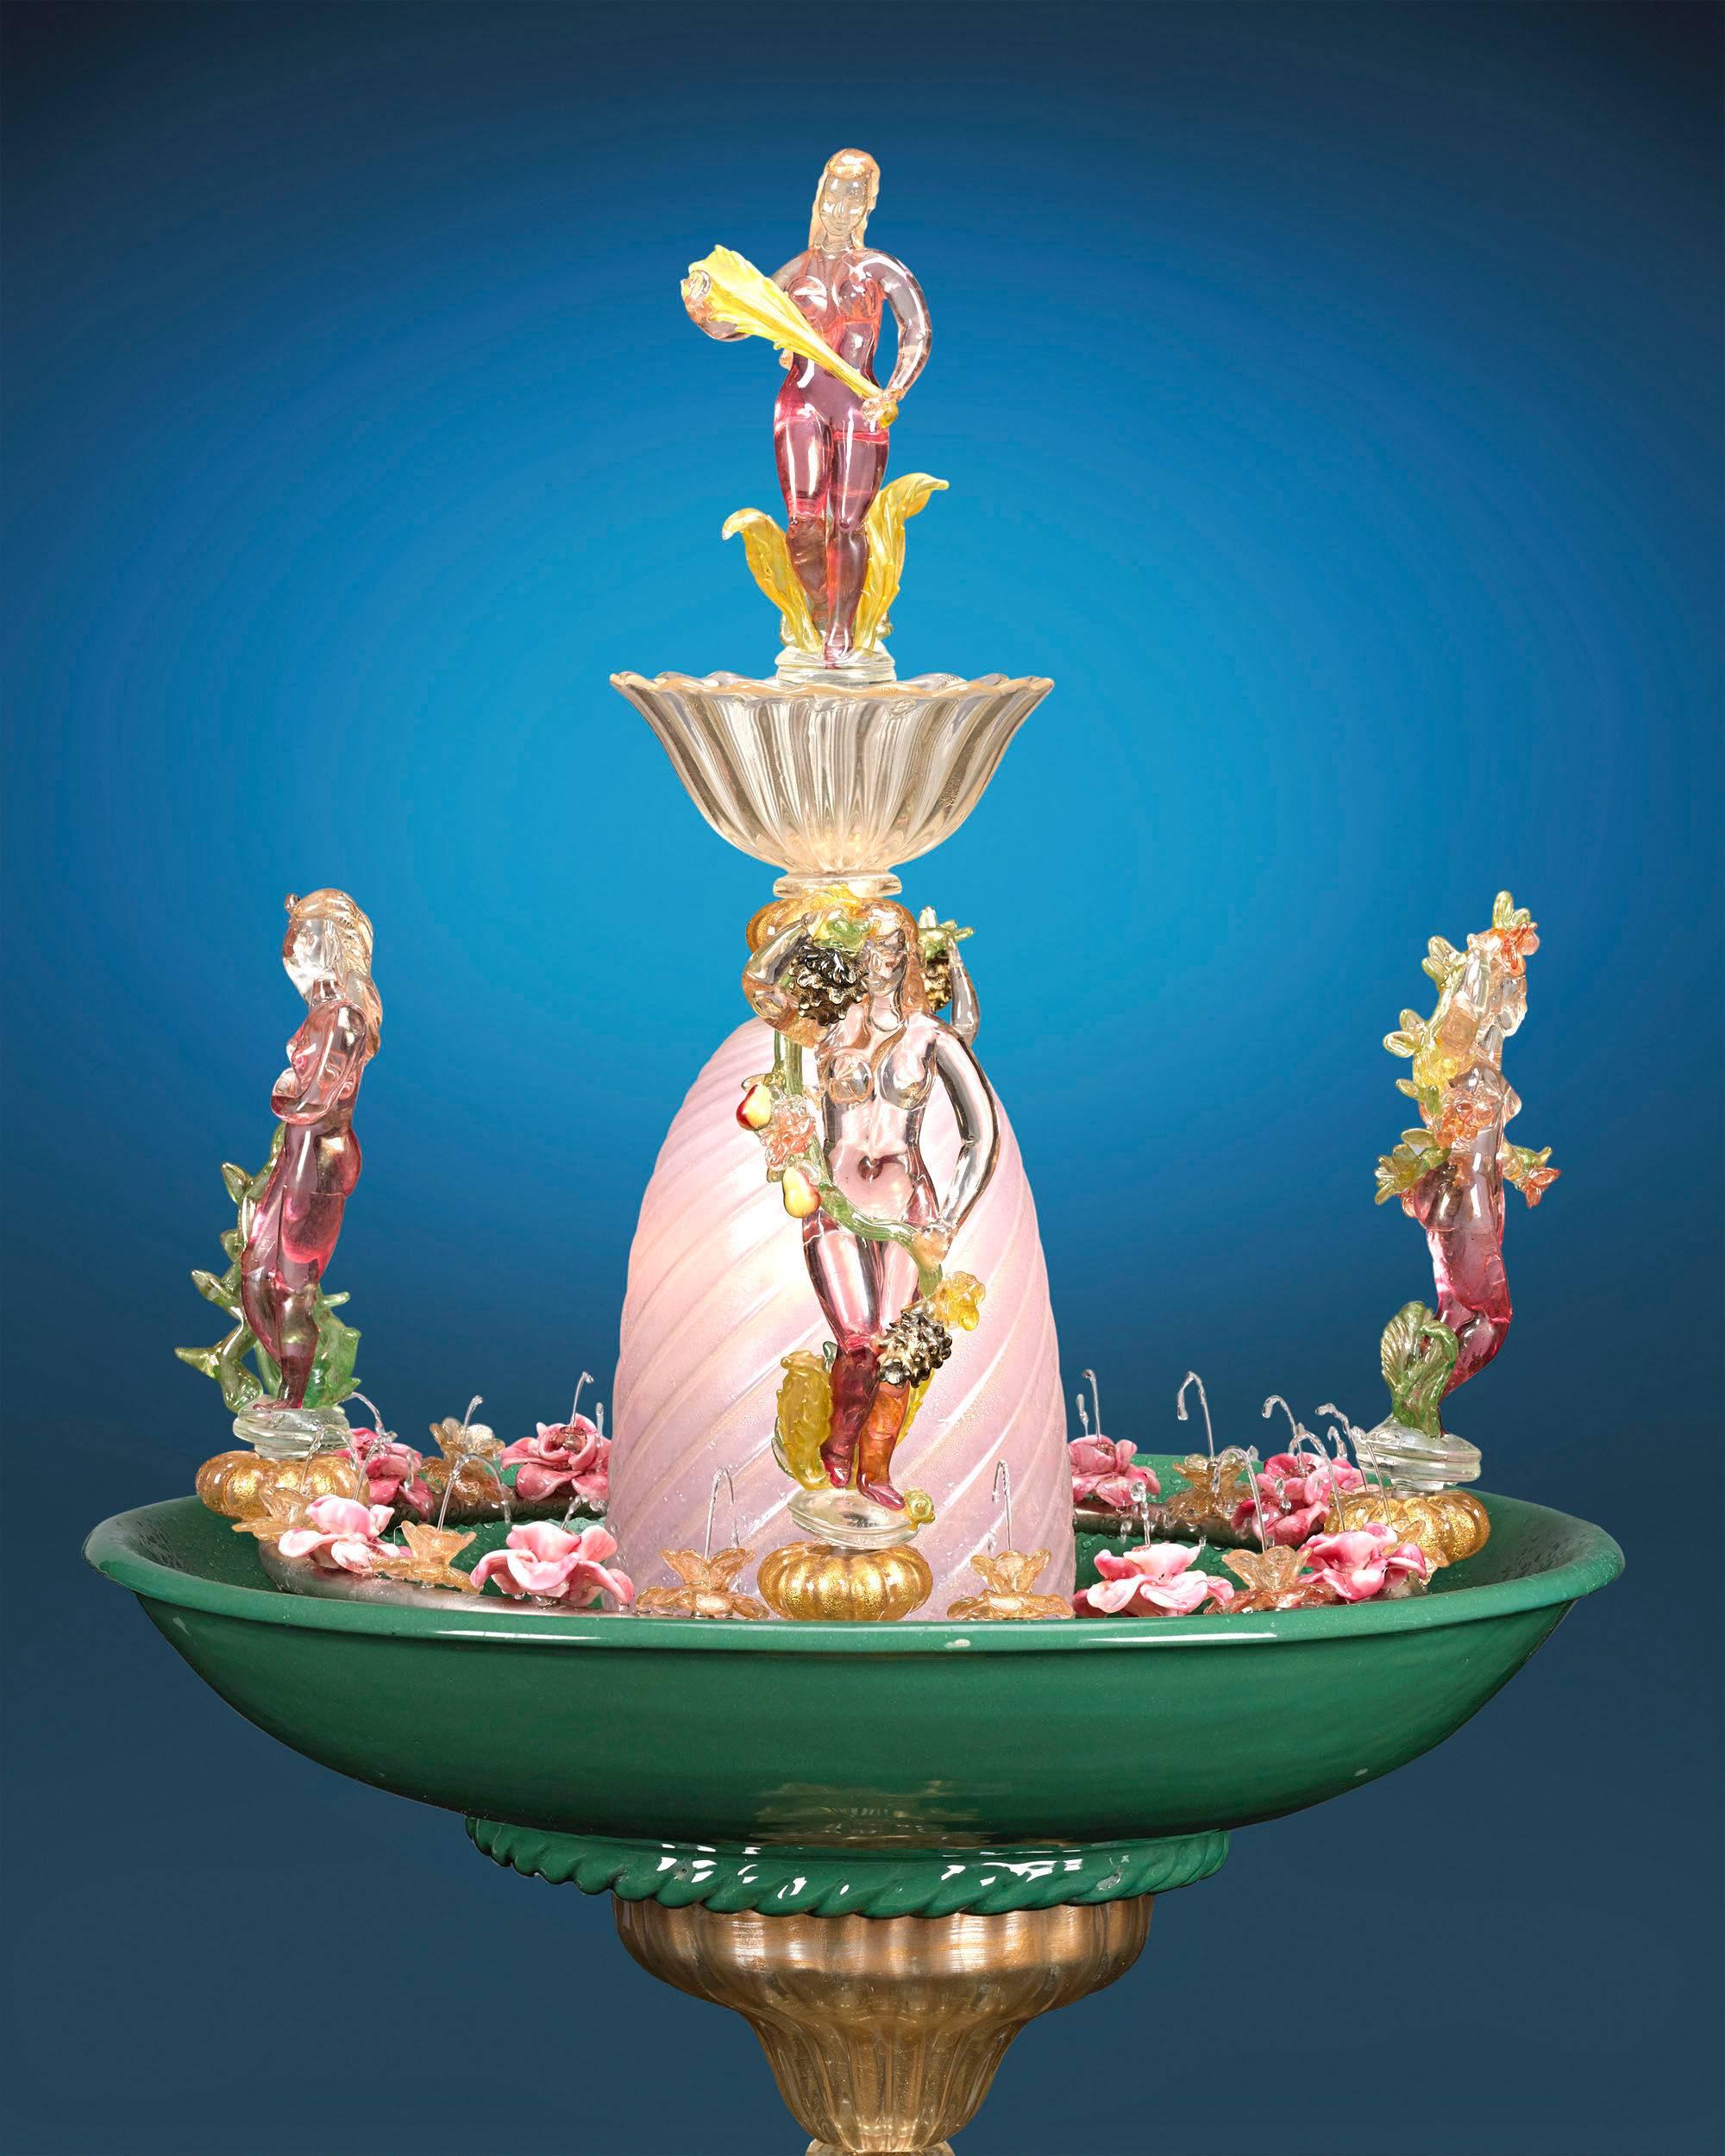 An ornate and truly magnificent example of a large Venetian glass, this Murano glass fountain is an incredible rarity. Only the most skilled of craftsmen could have created such a masterpiece, using the most painstaking and time-honored techniques